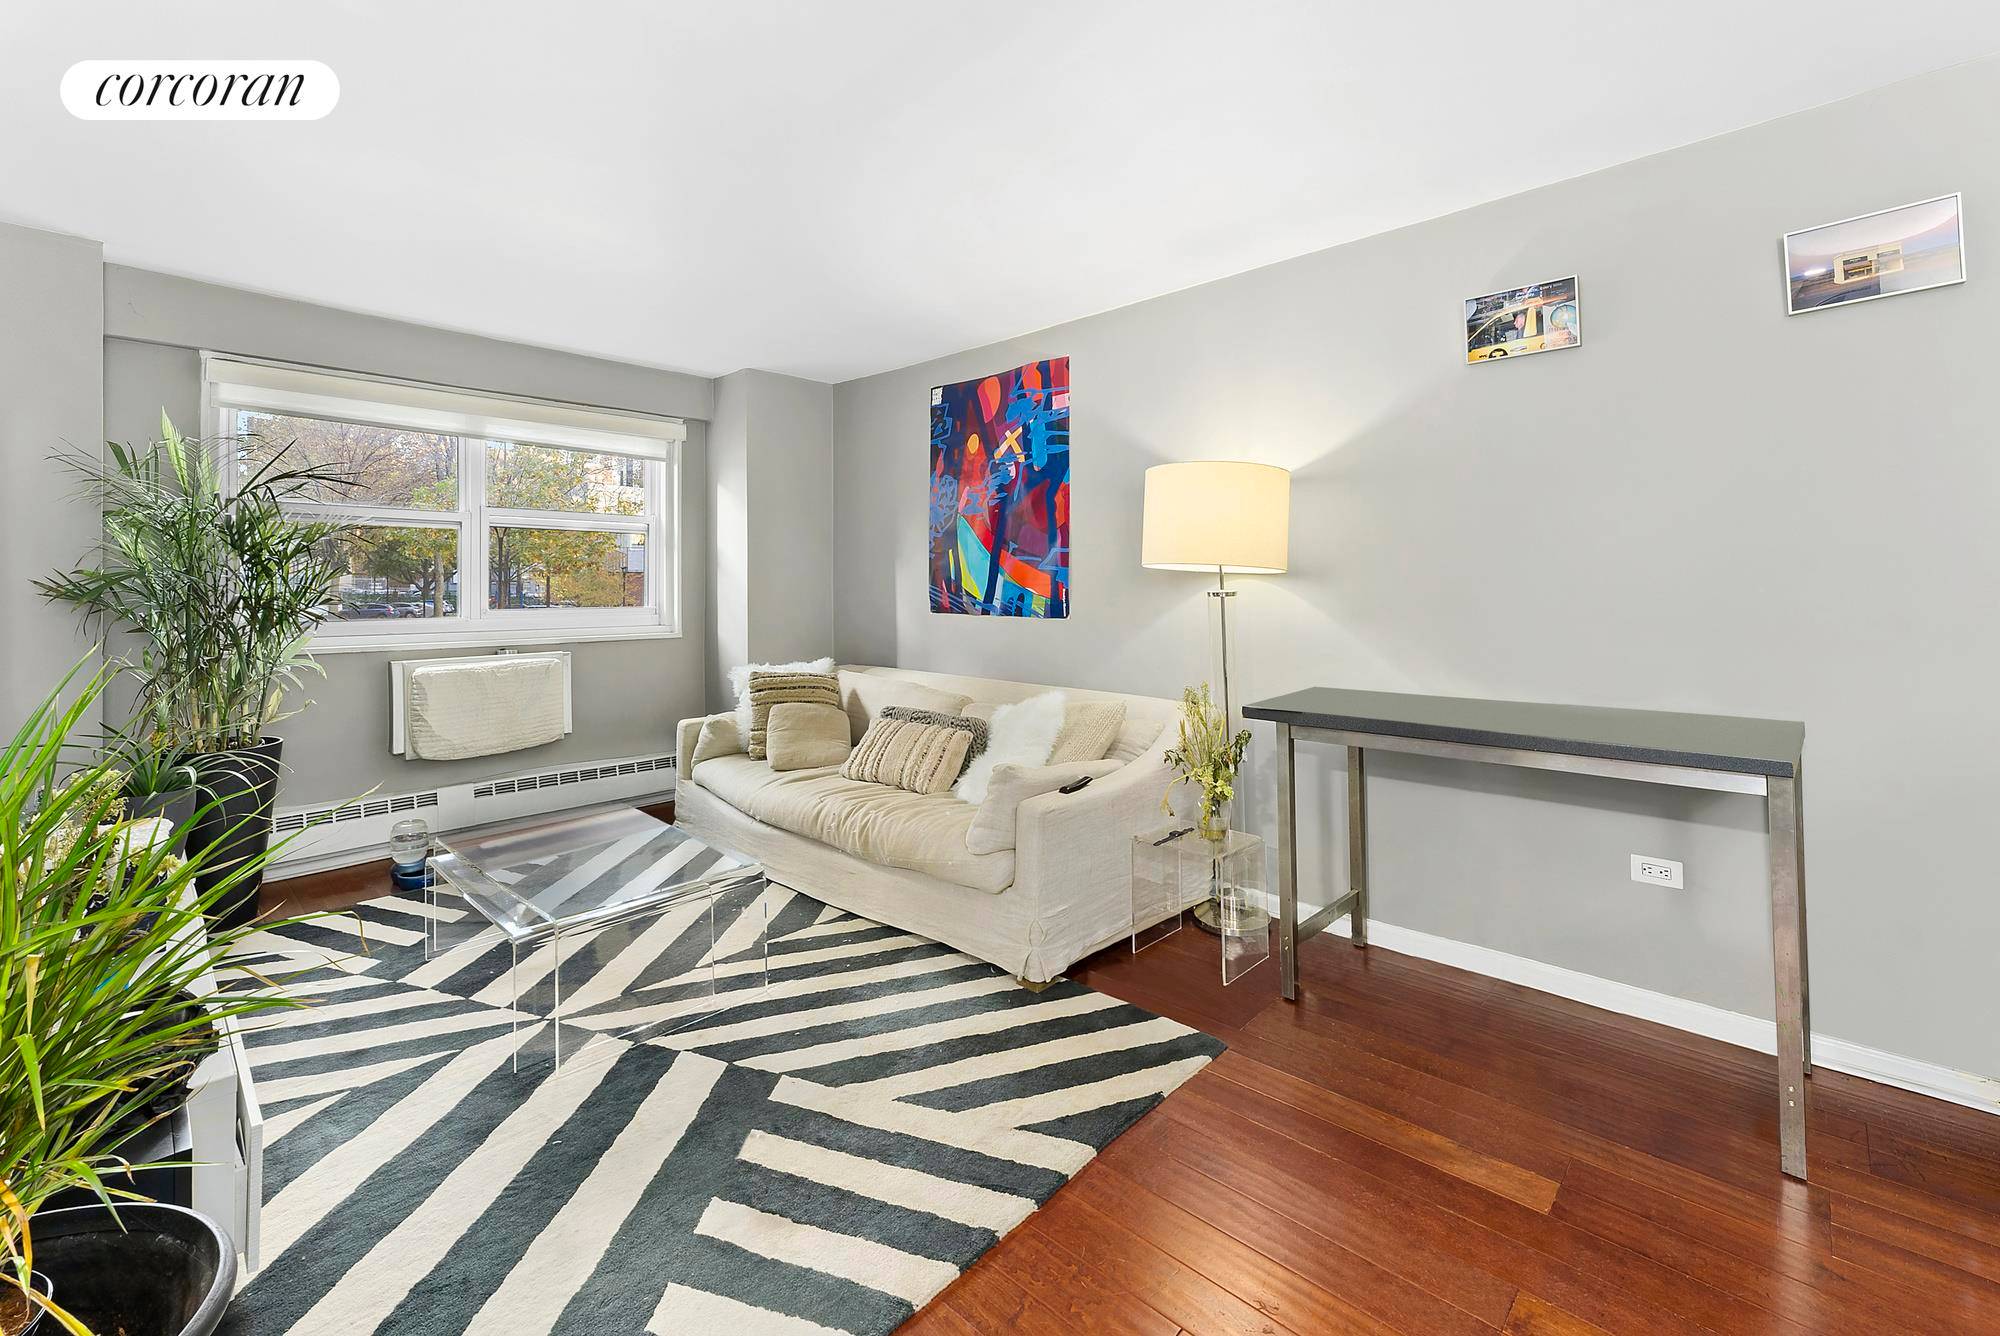 191 Willoughby St 2N is your new home at the intersection of Downtown Brooklyn and Fort Greene.